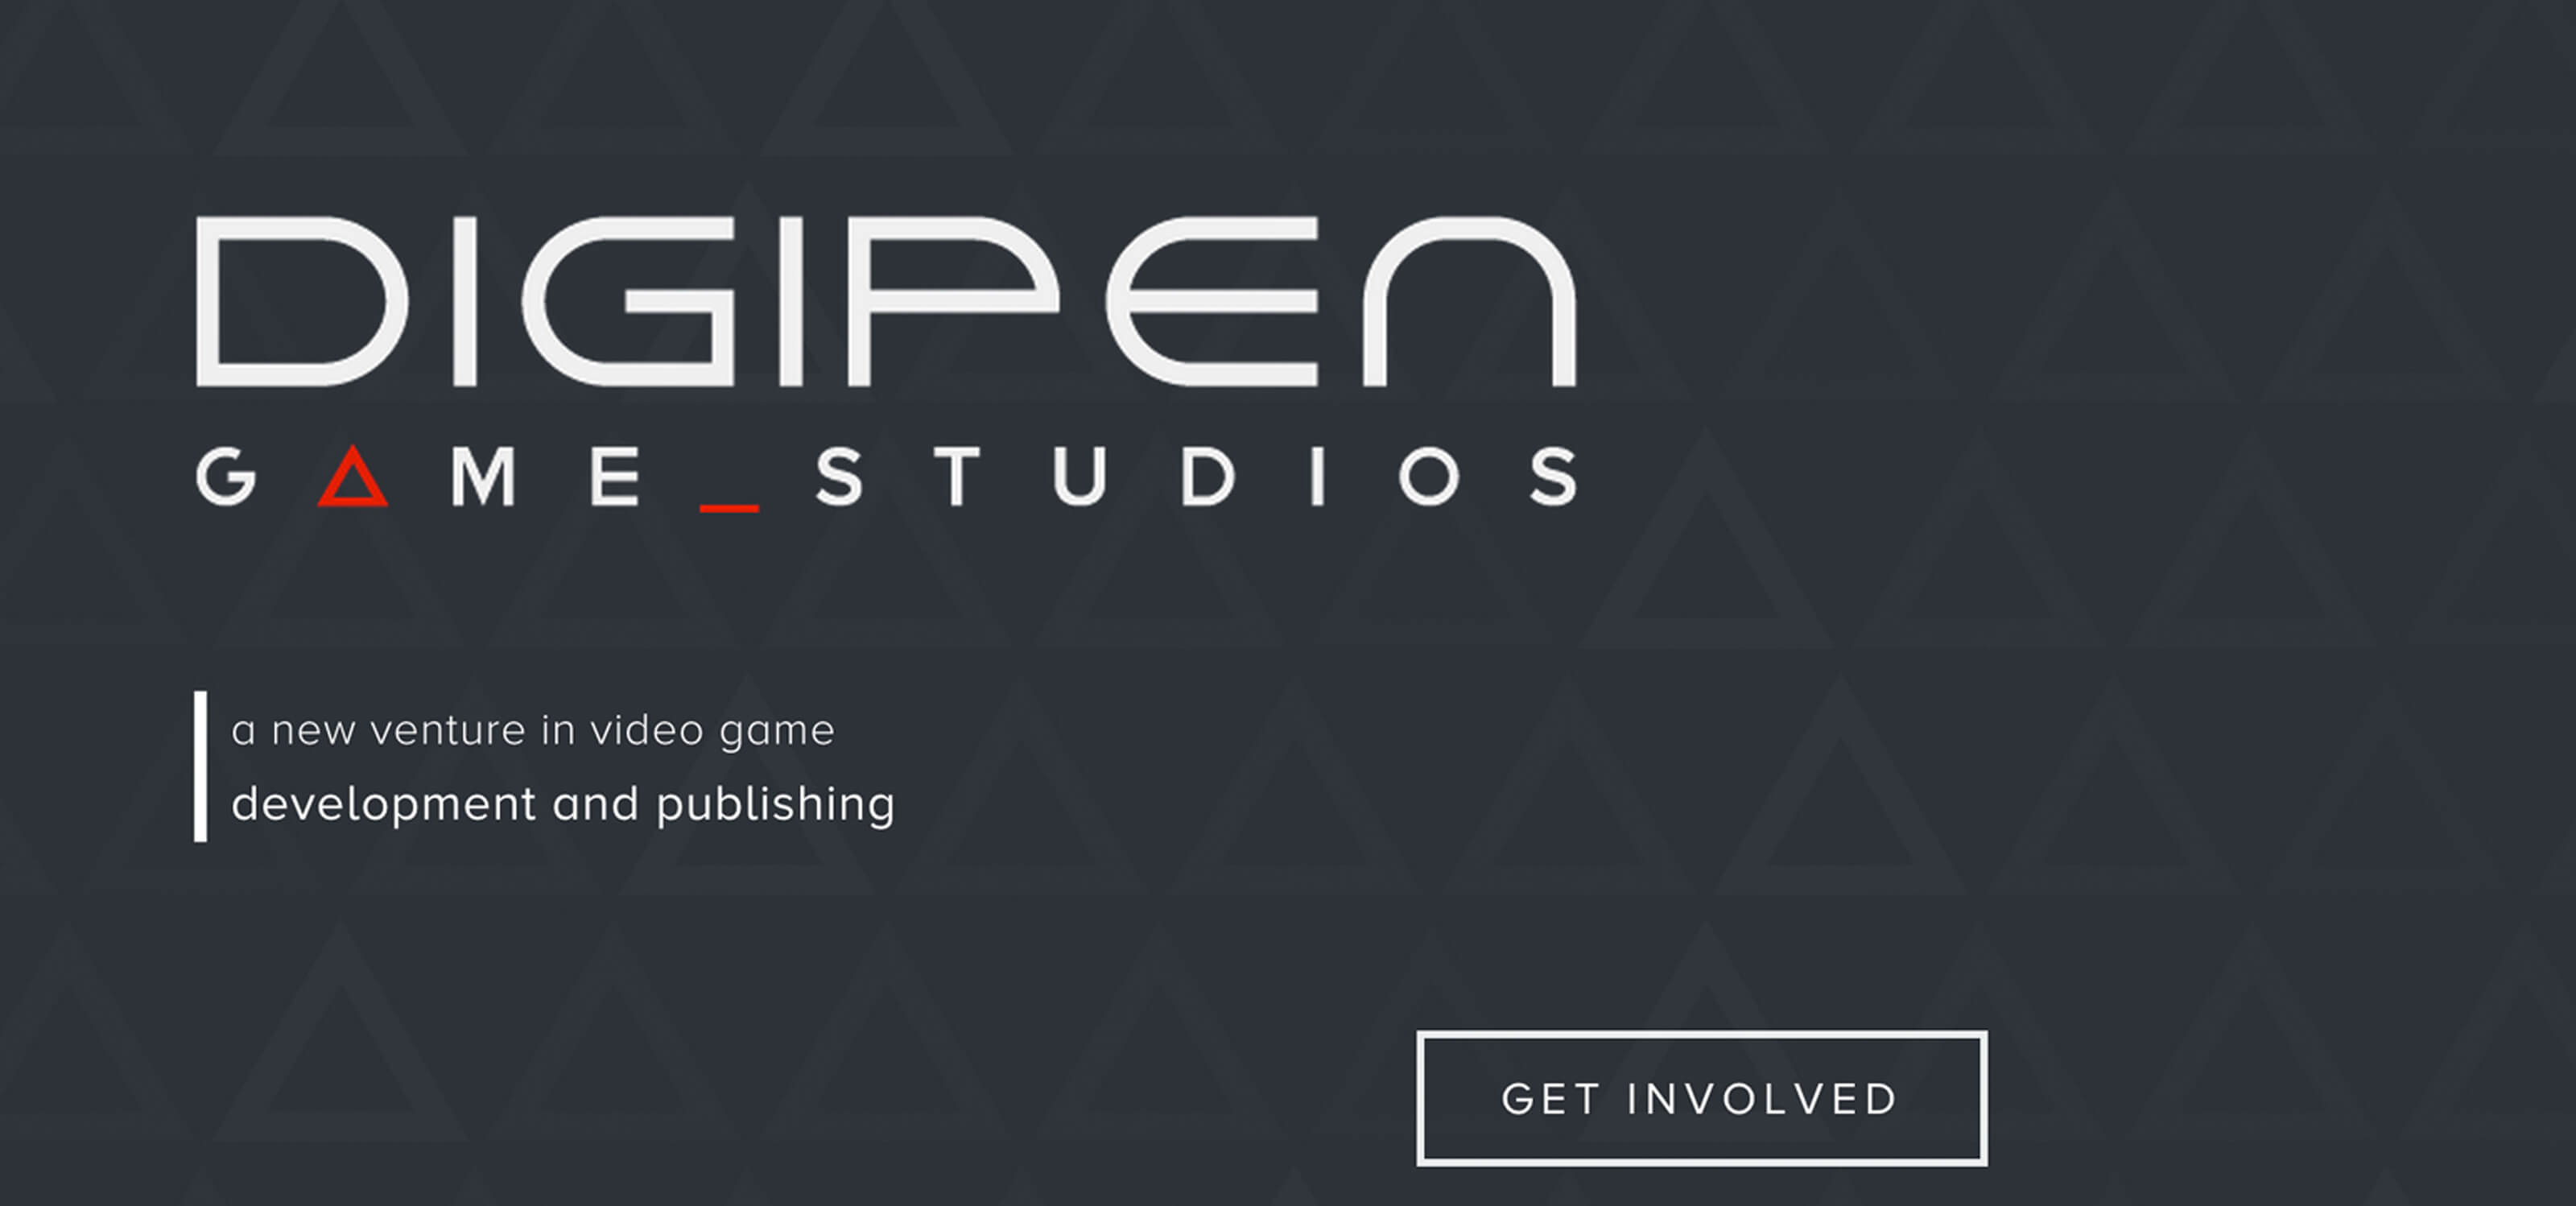 Screenshot of DigiPen Game Studios homepage with logo against a dark gray background with faint triangular outlines